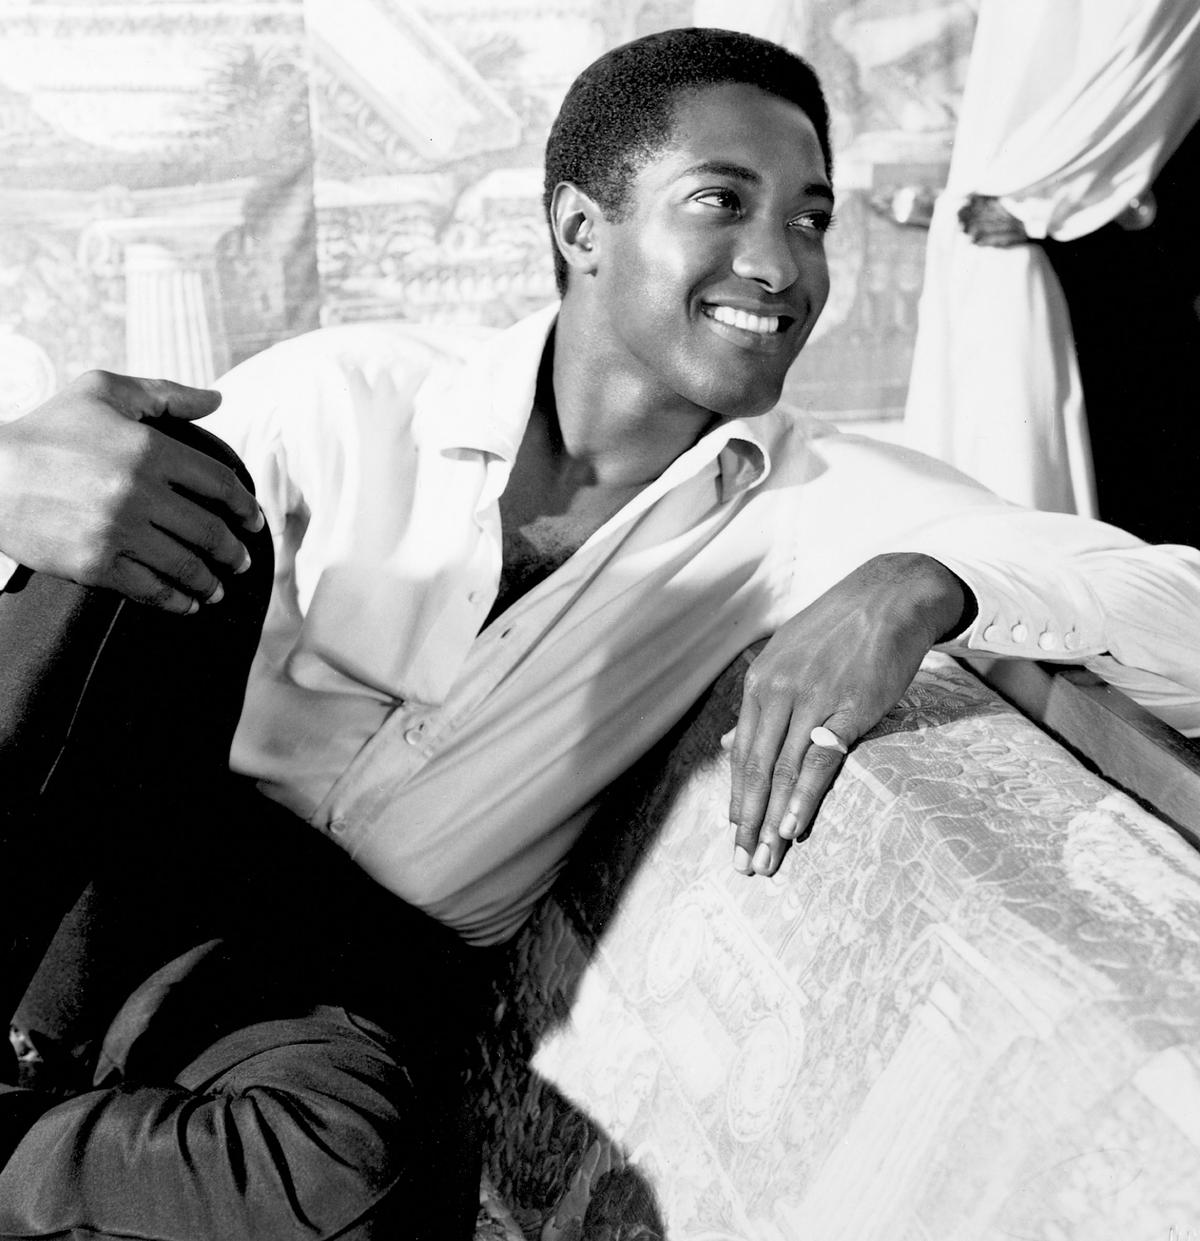 Lady, You Shot Me! How Sam Cooke, The King Of Soul, Was Killed In A Seedy Motel